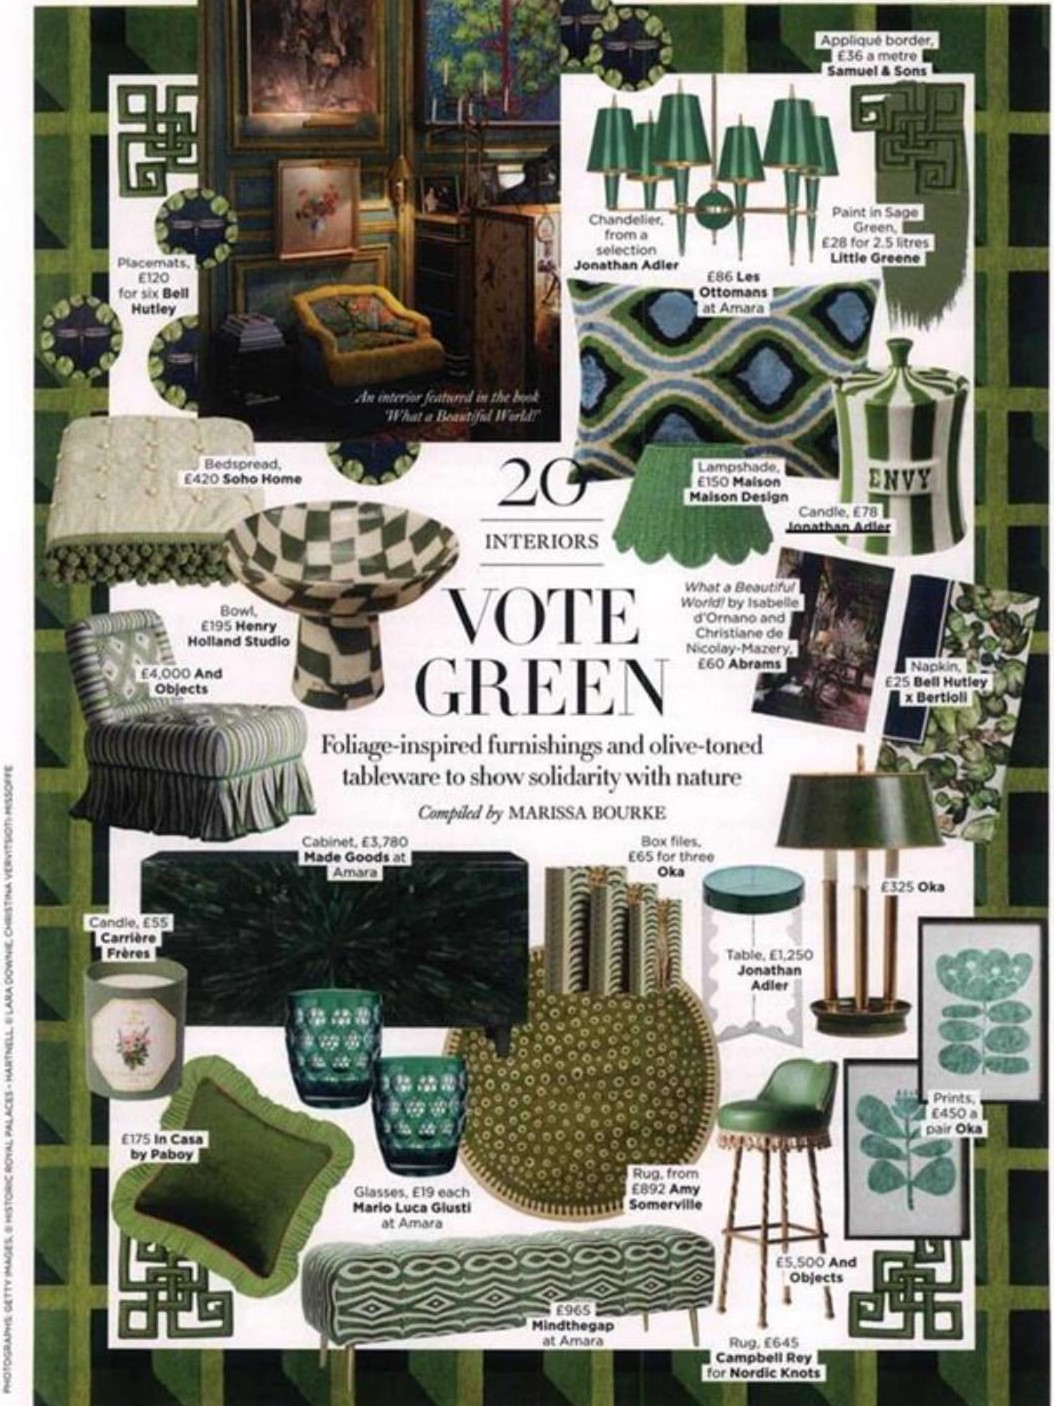 Harper's Bazaar are voting green with Jonathan Adler's chandelier, table and candle